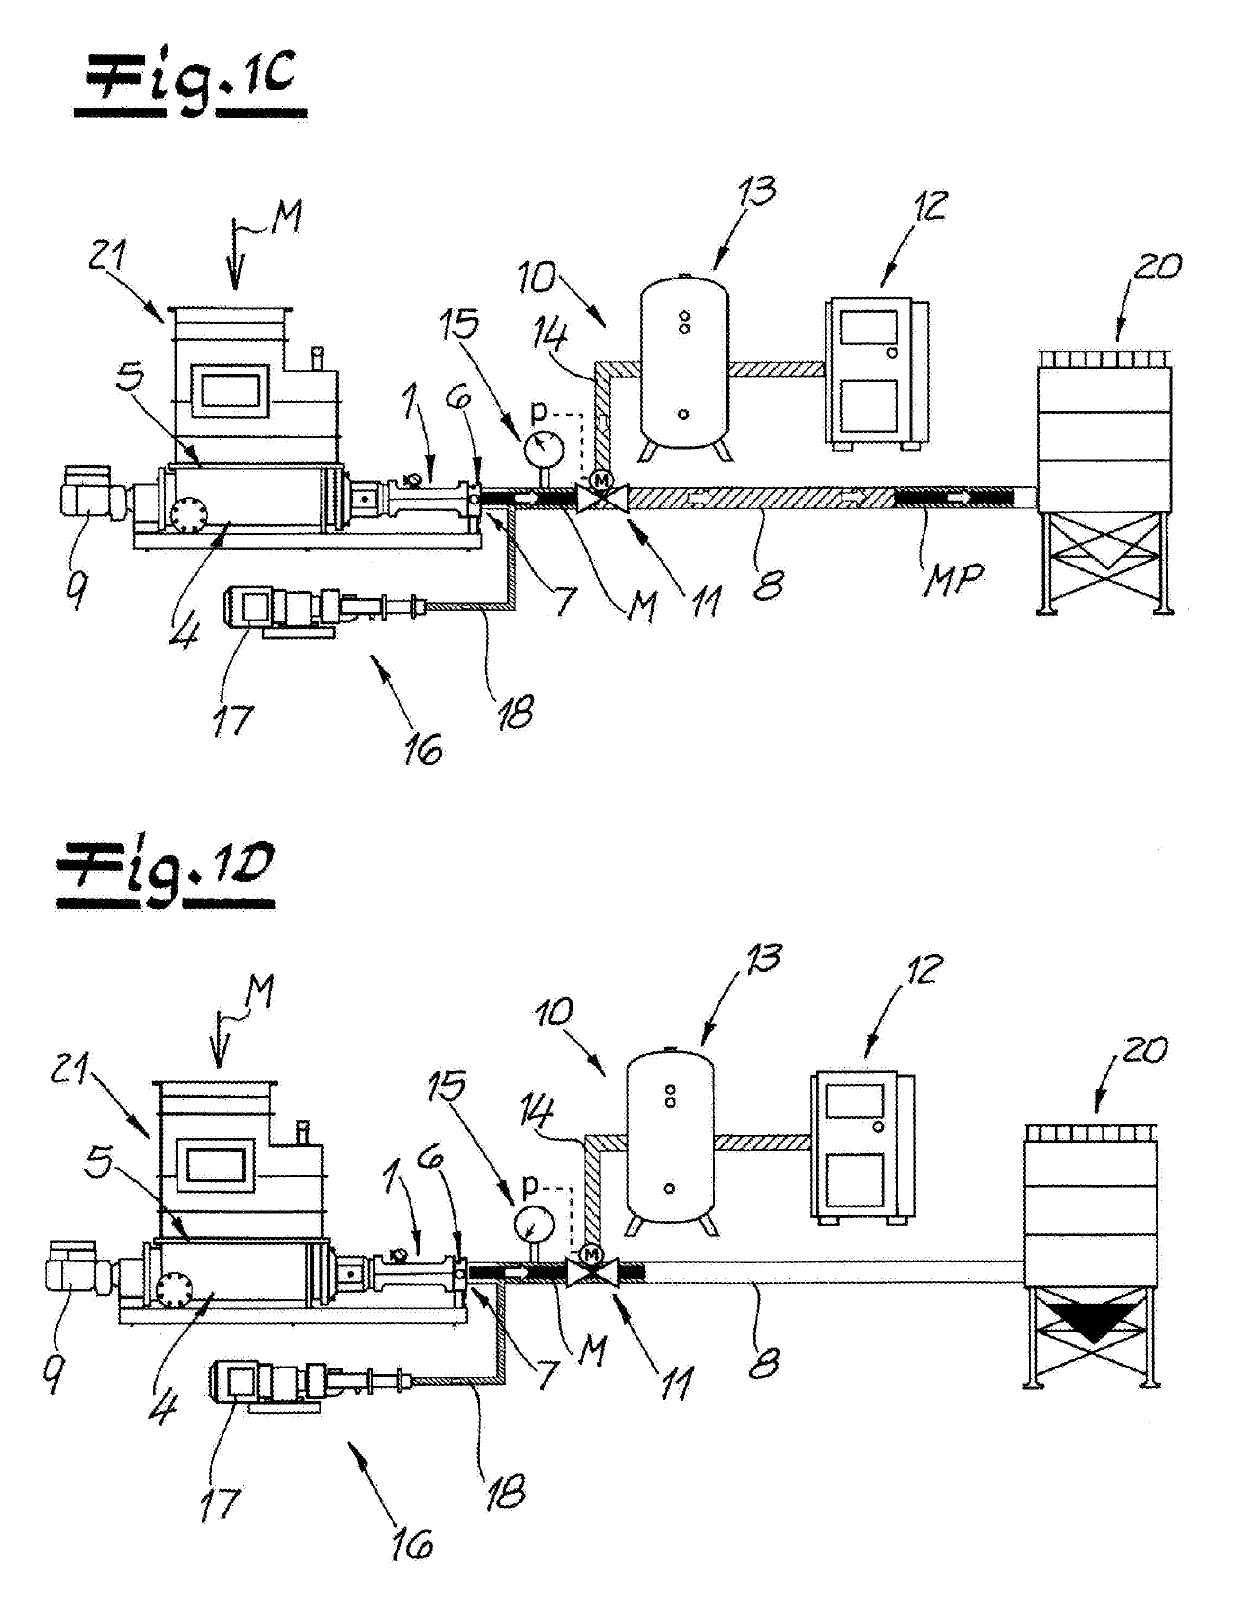 System for conveying pasty material